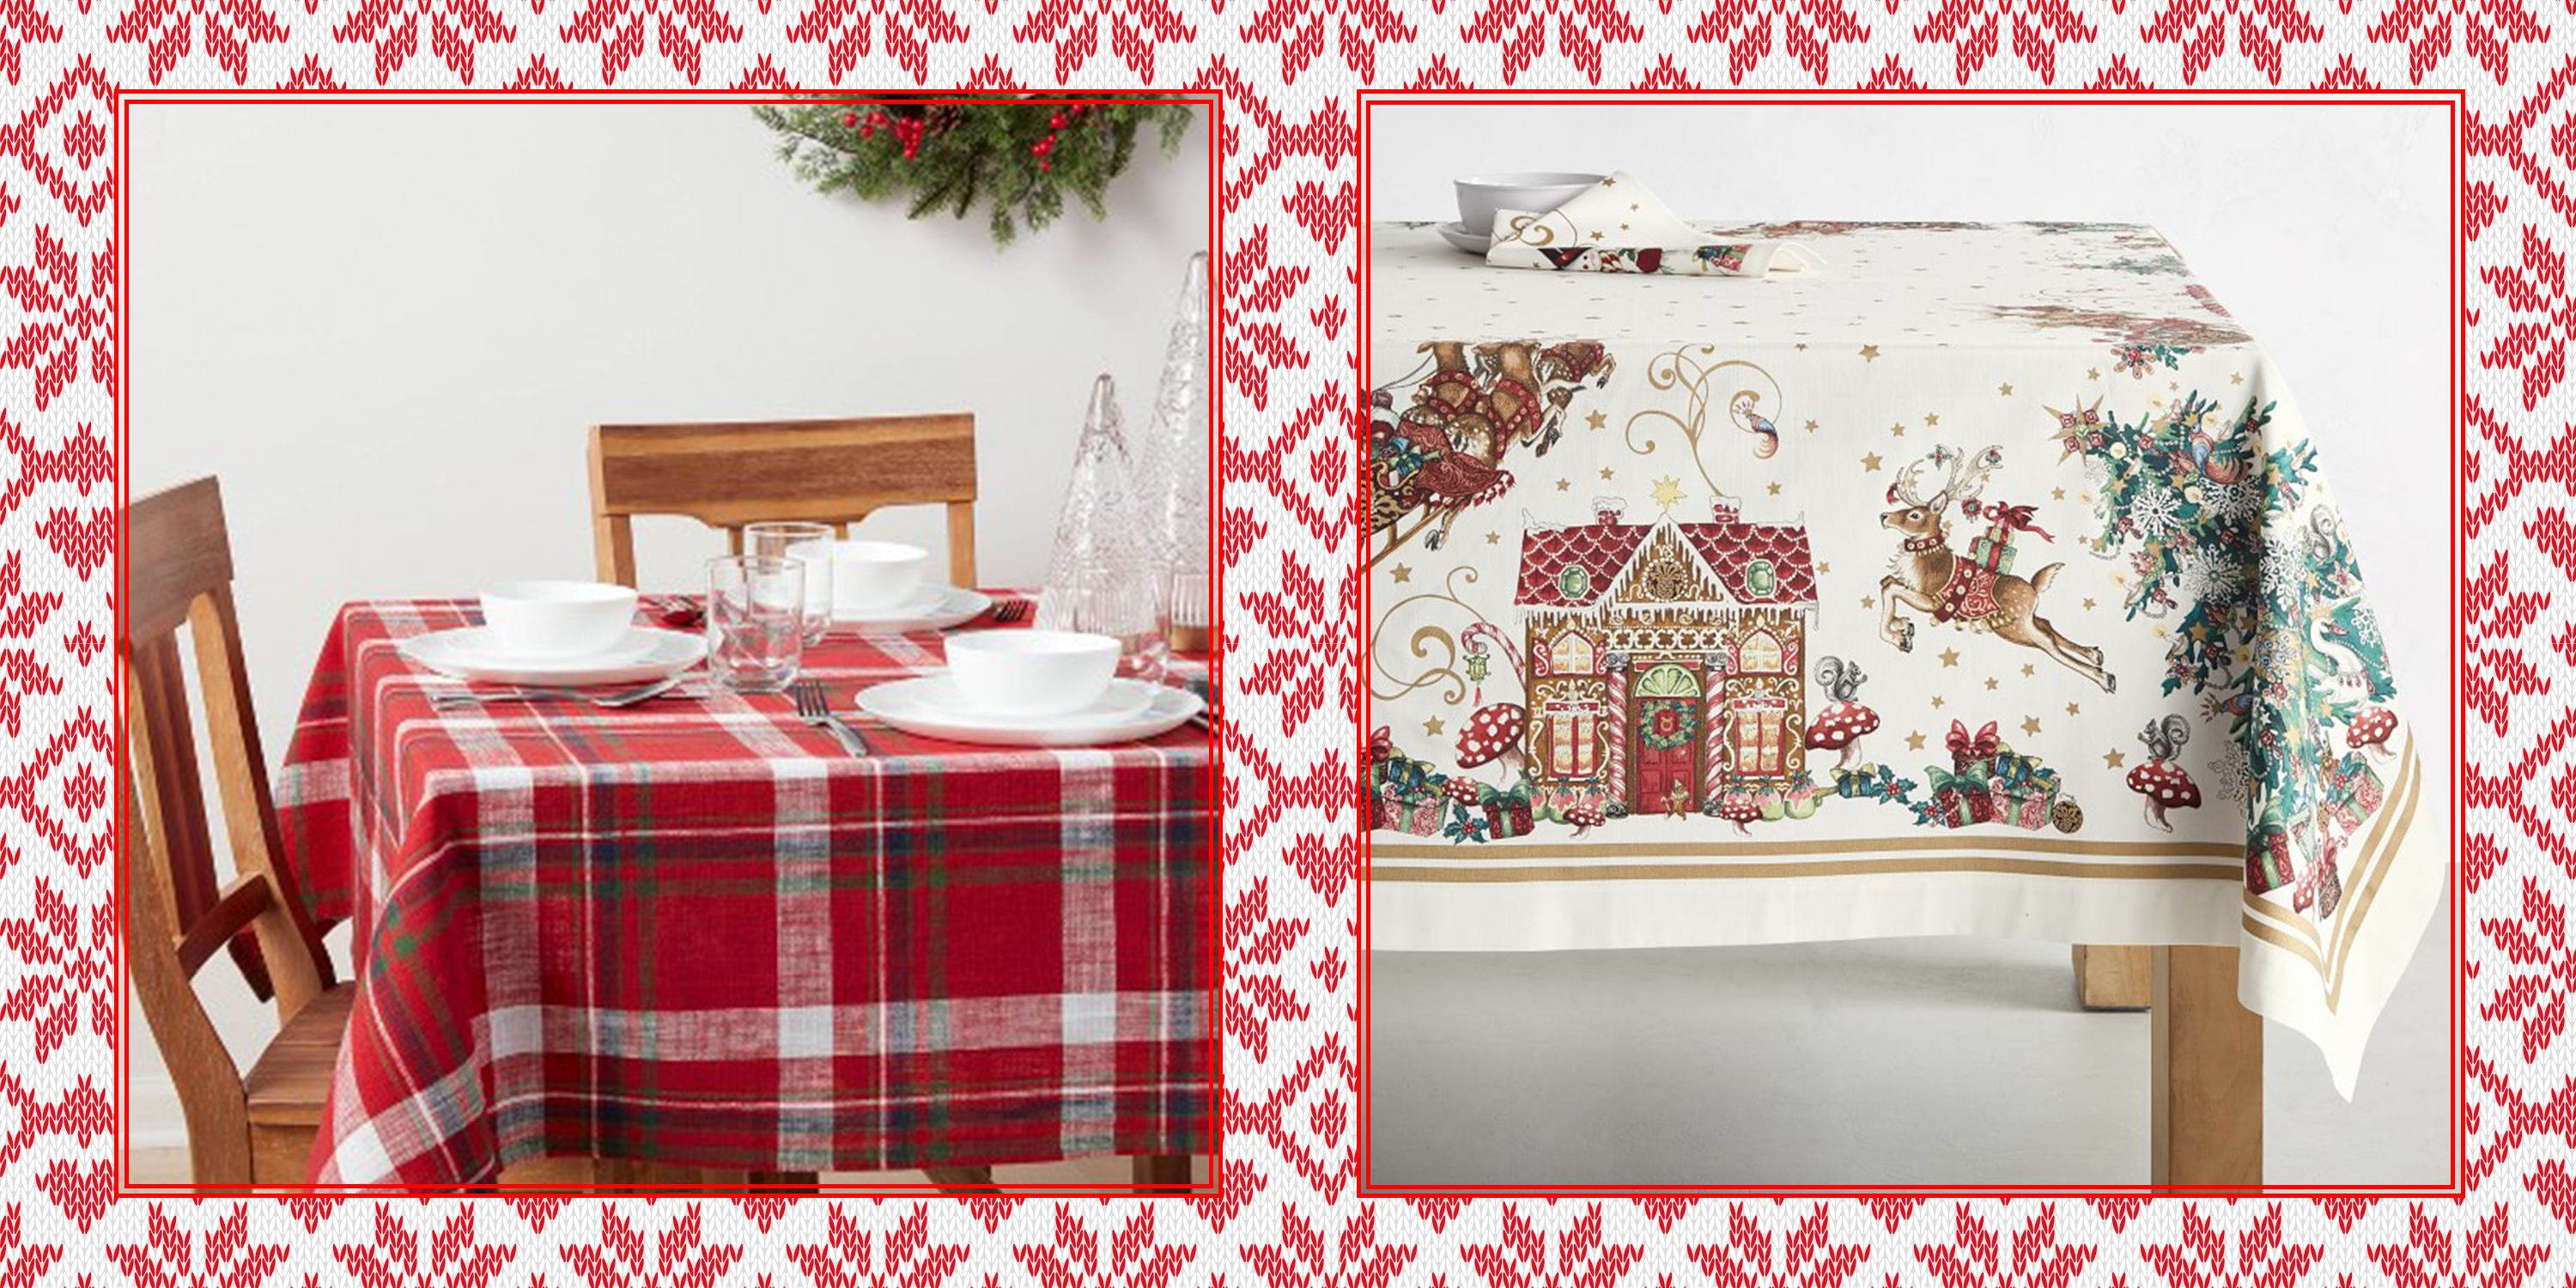 Winter Gingerbread Man Rectangle Table Cloth Linen Cover Placemat 54 W x 72 L for Kitchen Dining Room Party Wedding Wamika Merry Christmas Tree Snowman Tablecloth Table Cover Mat Home Decoration